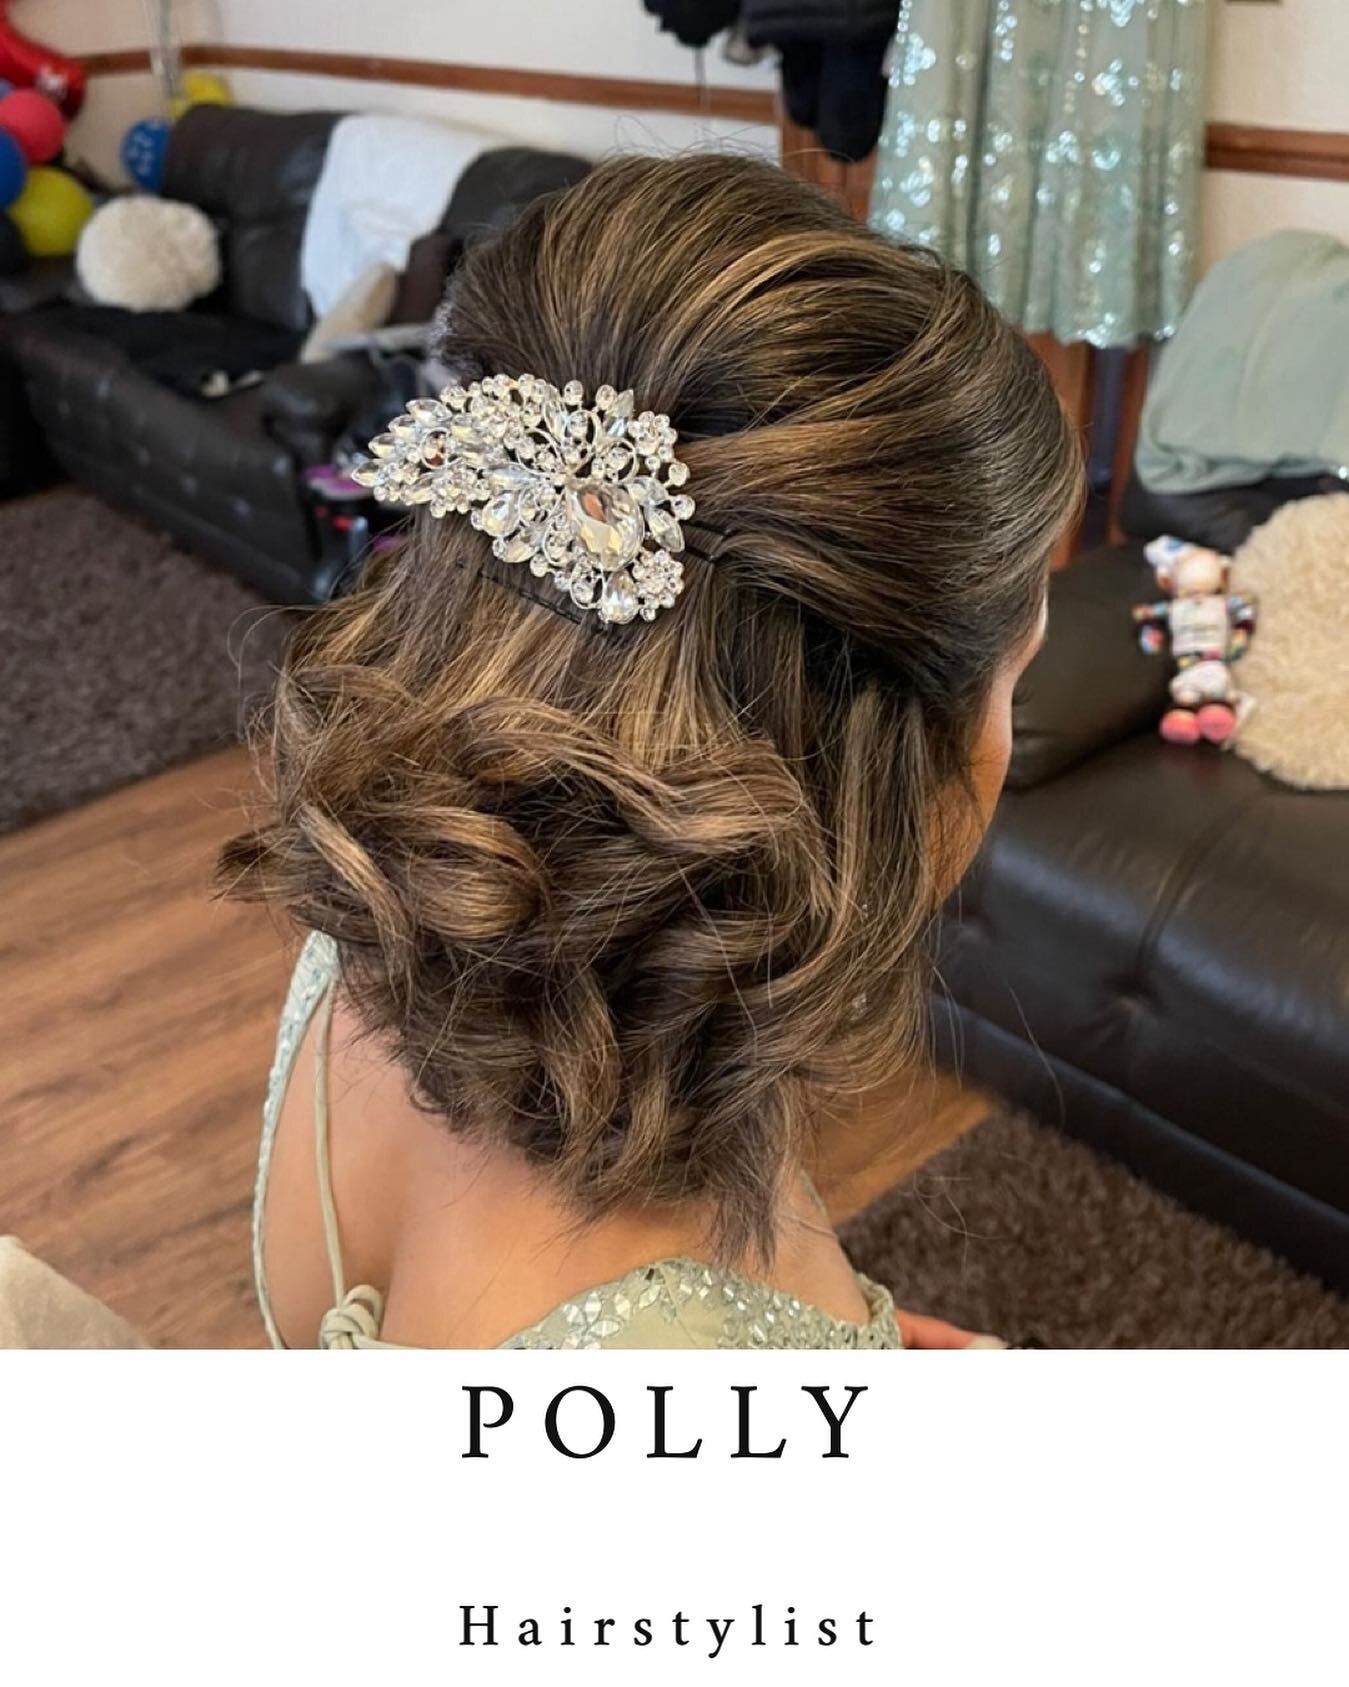 💁🏽&zwj;♀️Hairstylist: POLLY
📍Location: BIRMINGHAM - available to travel ----------------------------------------------------------------------------------
To BOOK 👉🏽 Send us a DM or email us at promakeuplondonstylists@gmail.com -----------------